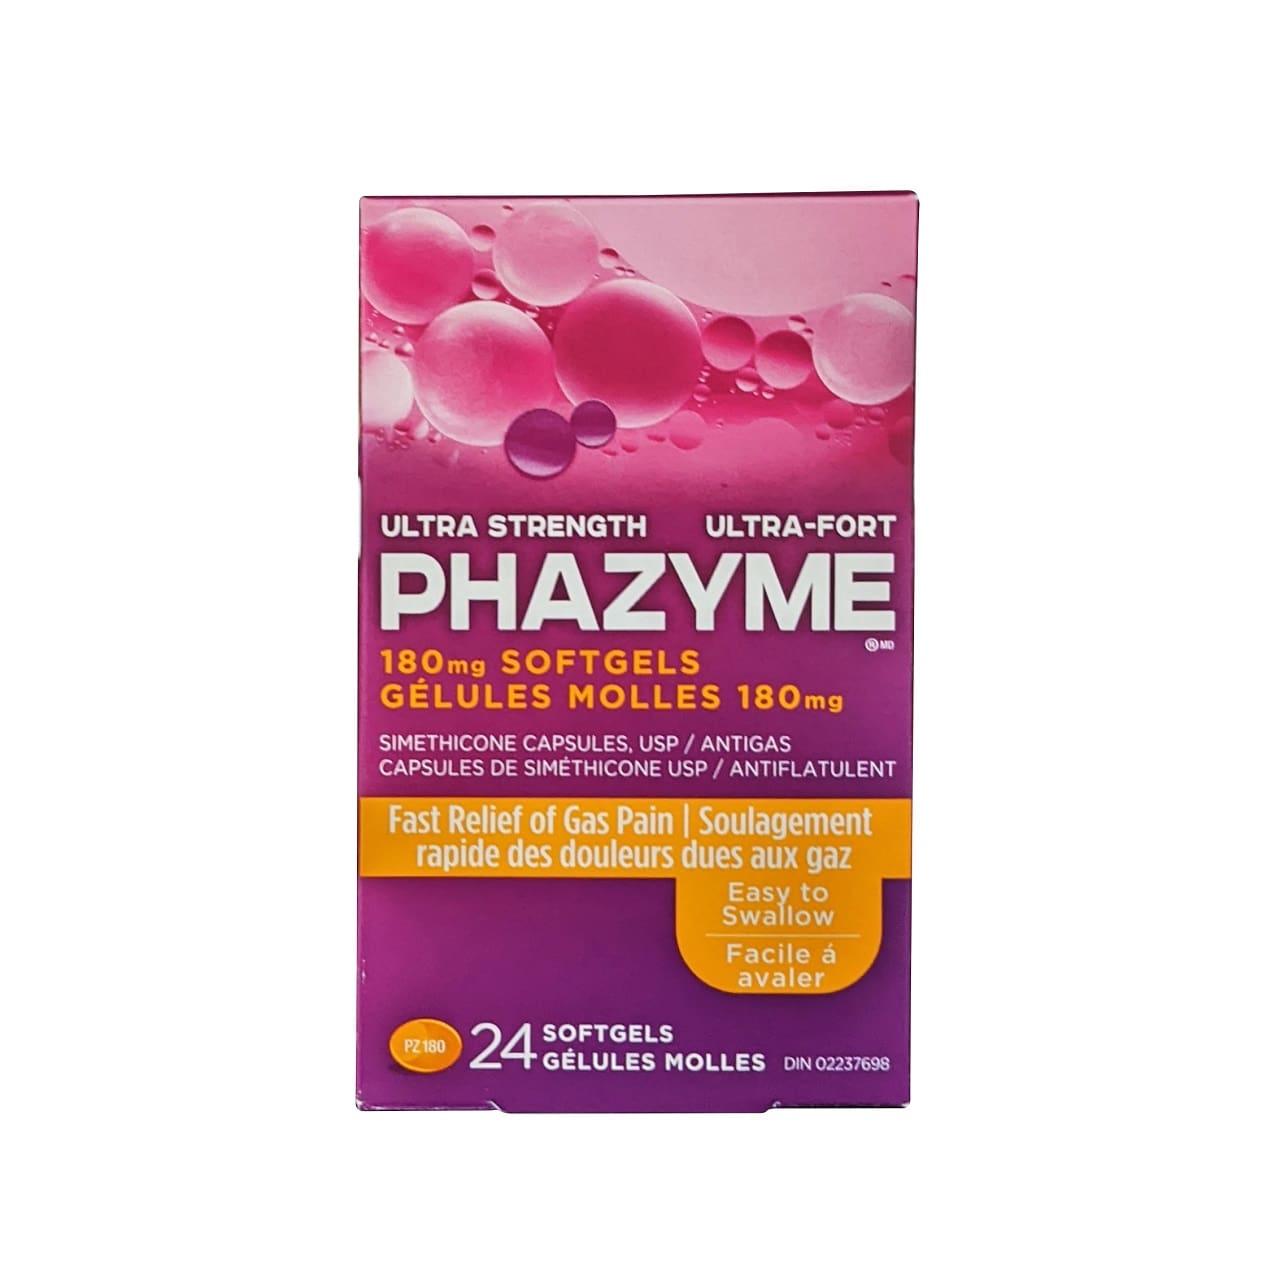 Product label for Phazyme Ultra Strength Simethicone 180 mg (24 softgels)